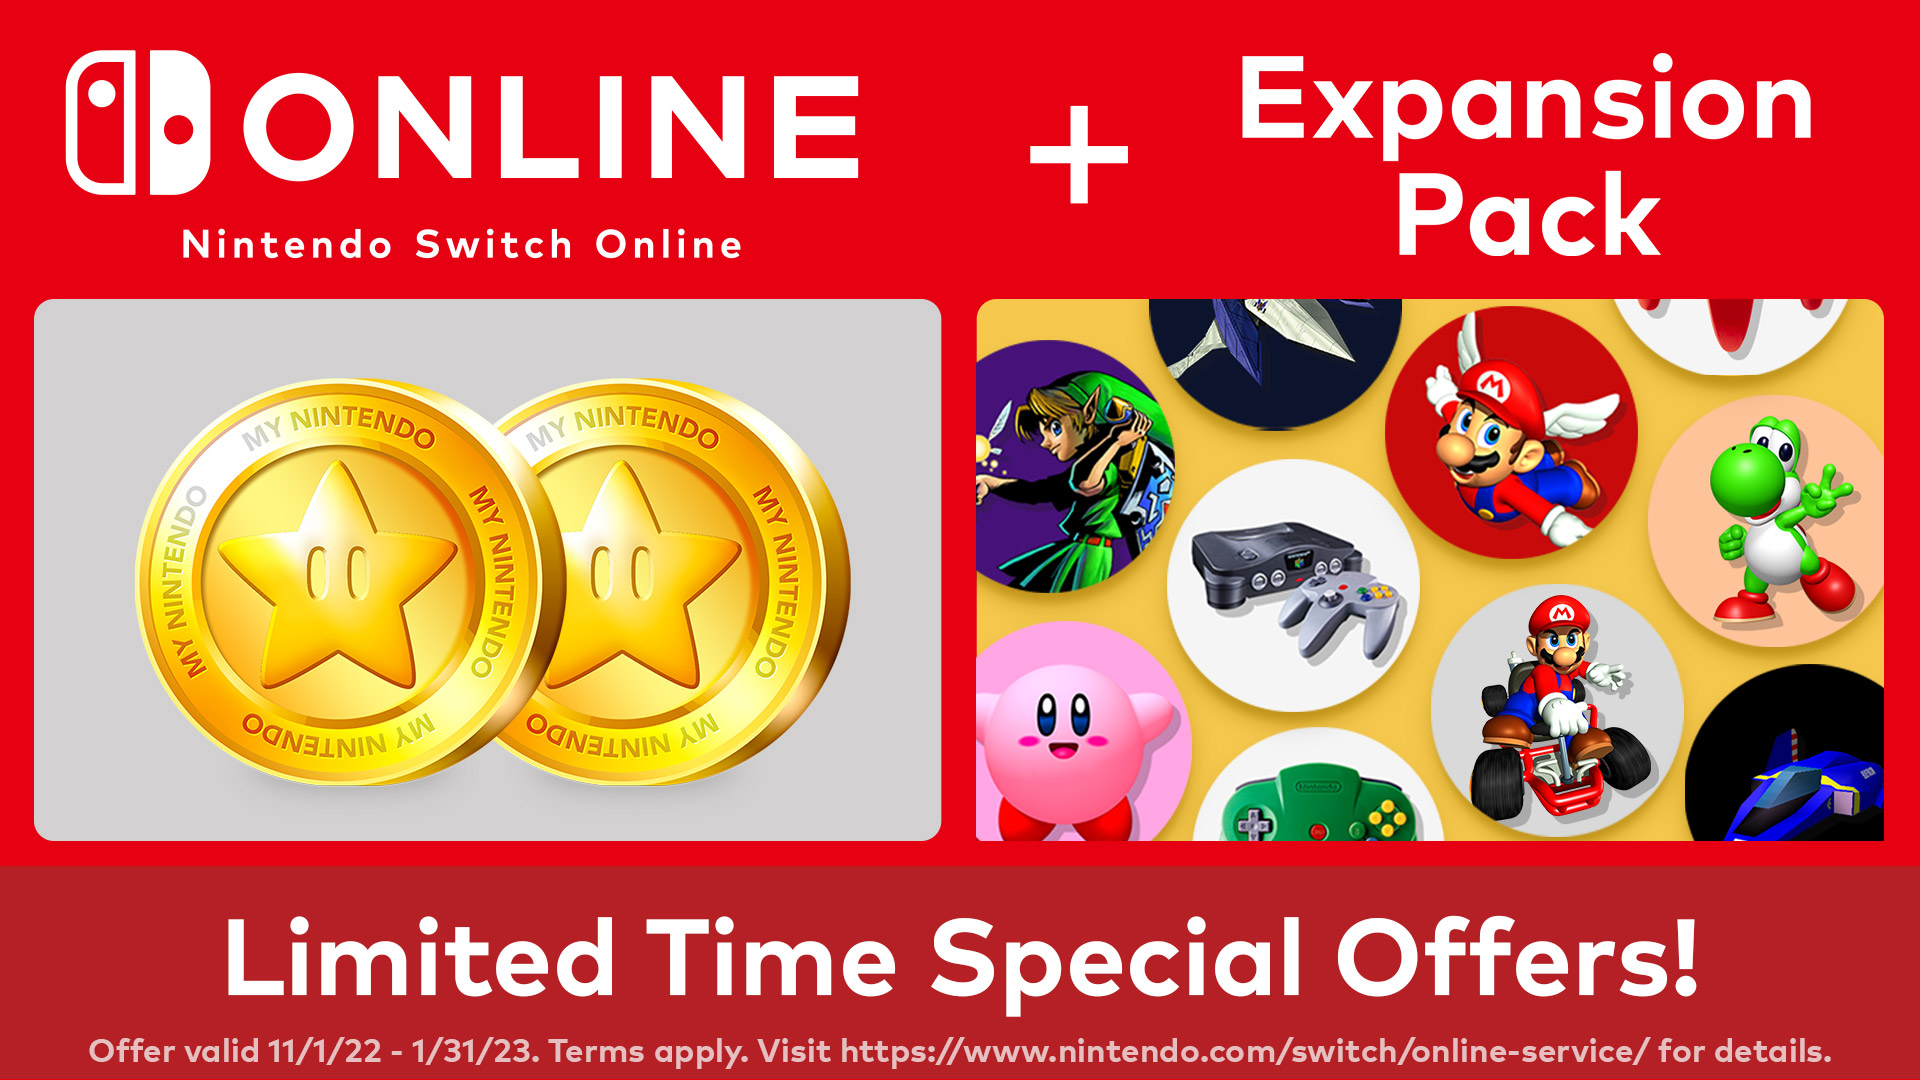 Nintendo of America on benefits are coming for #NintendoSwitchOnline + Expansion Pack members 11/1! ✓ Earn double Gold Points on the purchase of eligible digital games or DLC